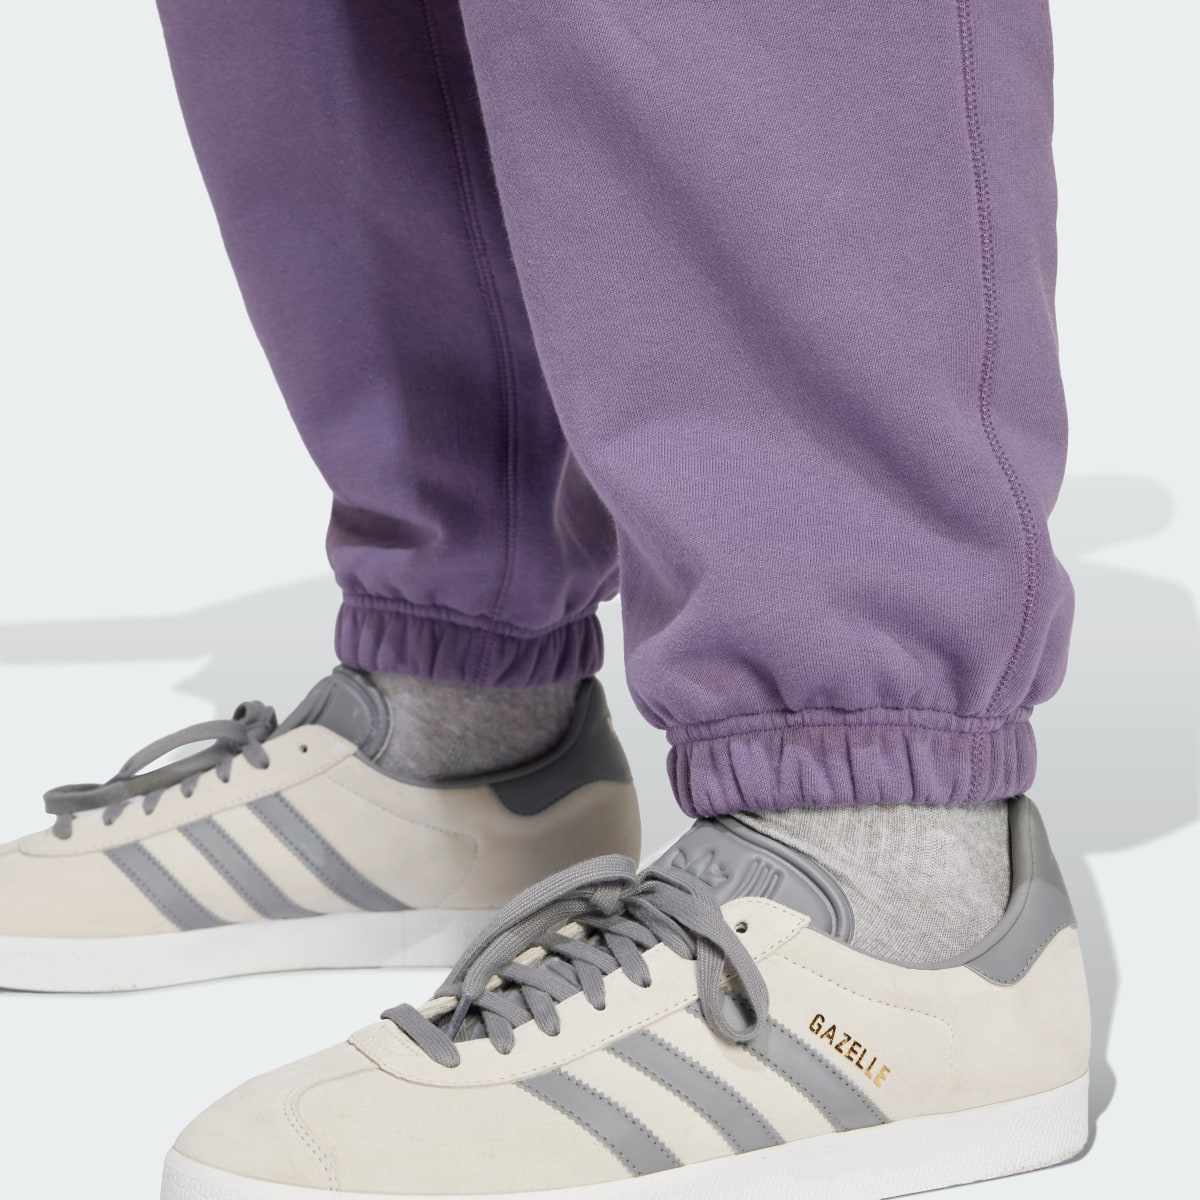 Adidas Adicolor Contempo French Terry Sweat Joggers. 6